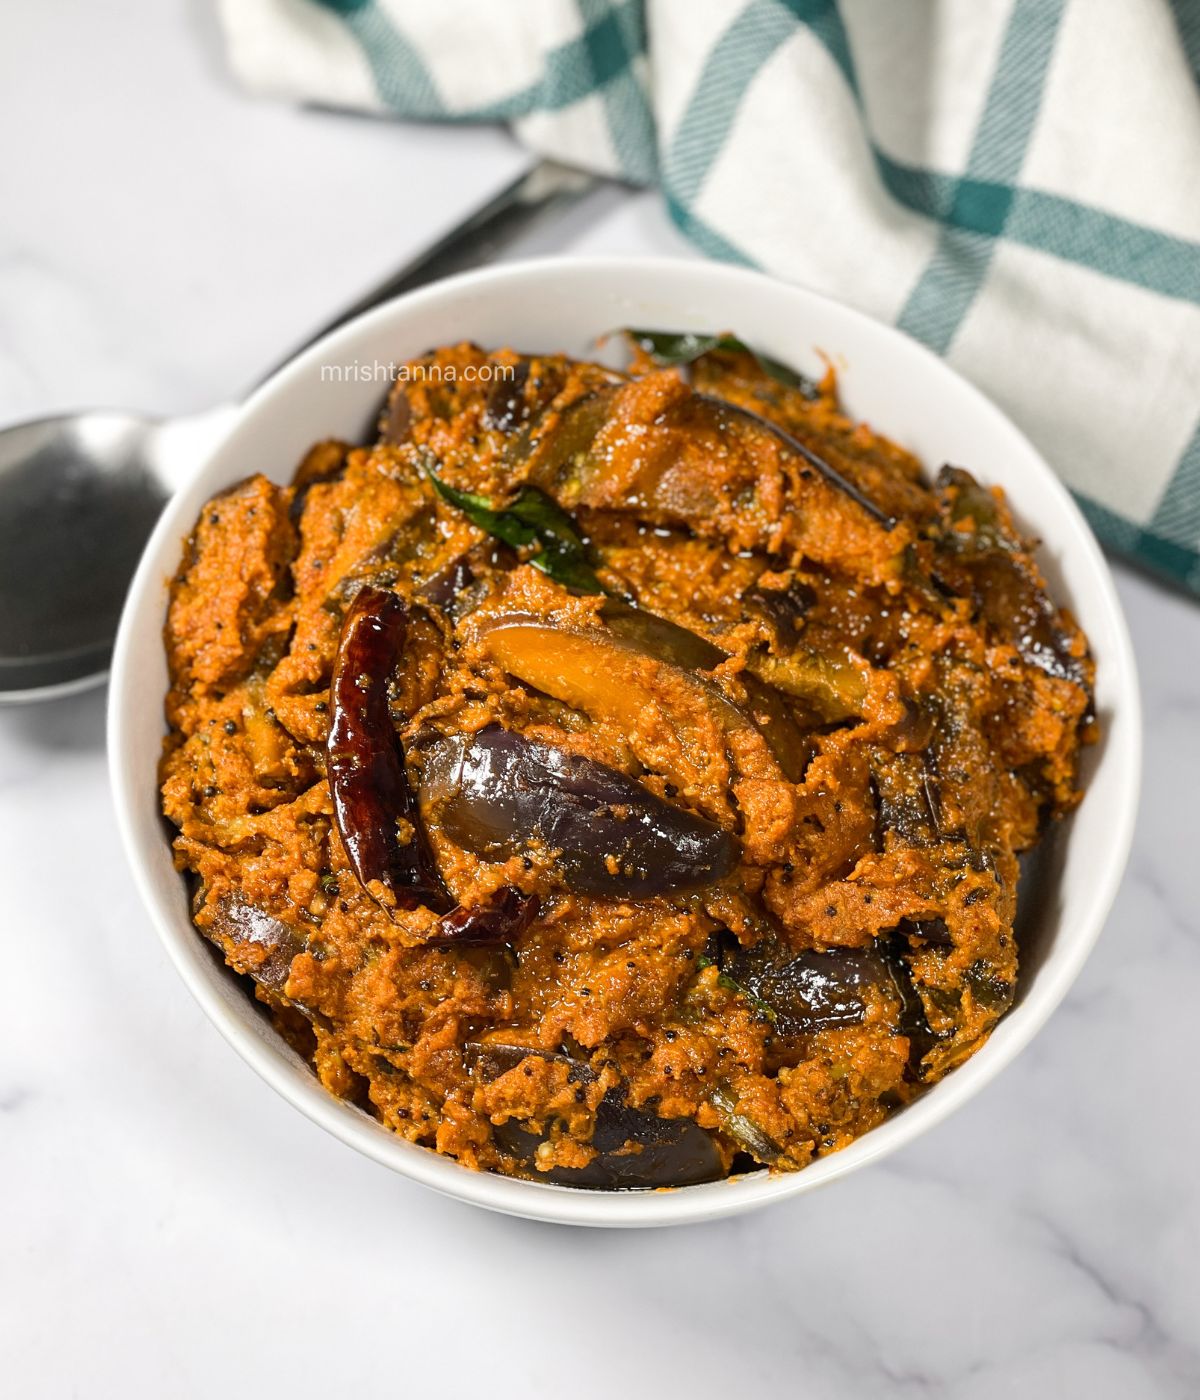 A bowl of South Indian Eggplant curry is on the table.